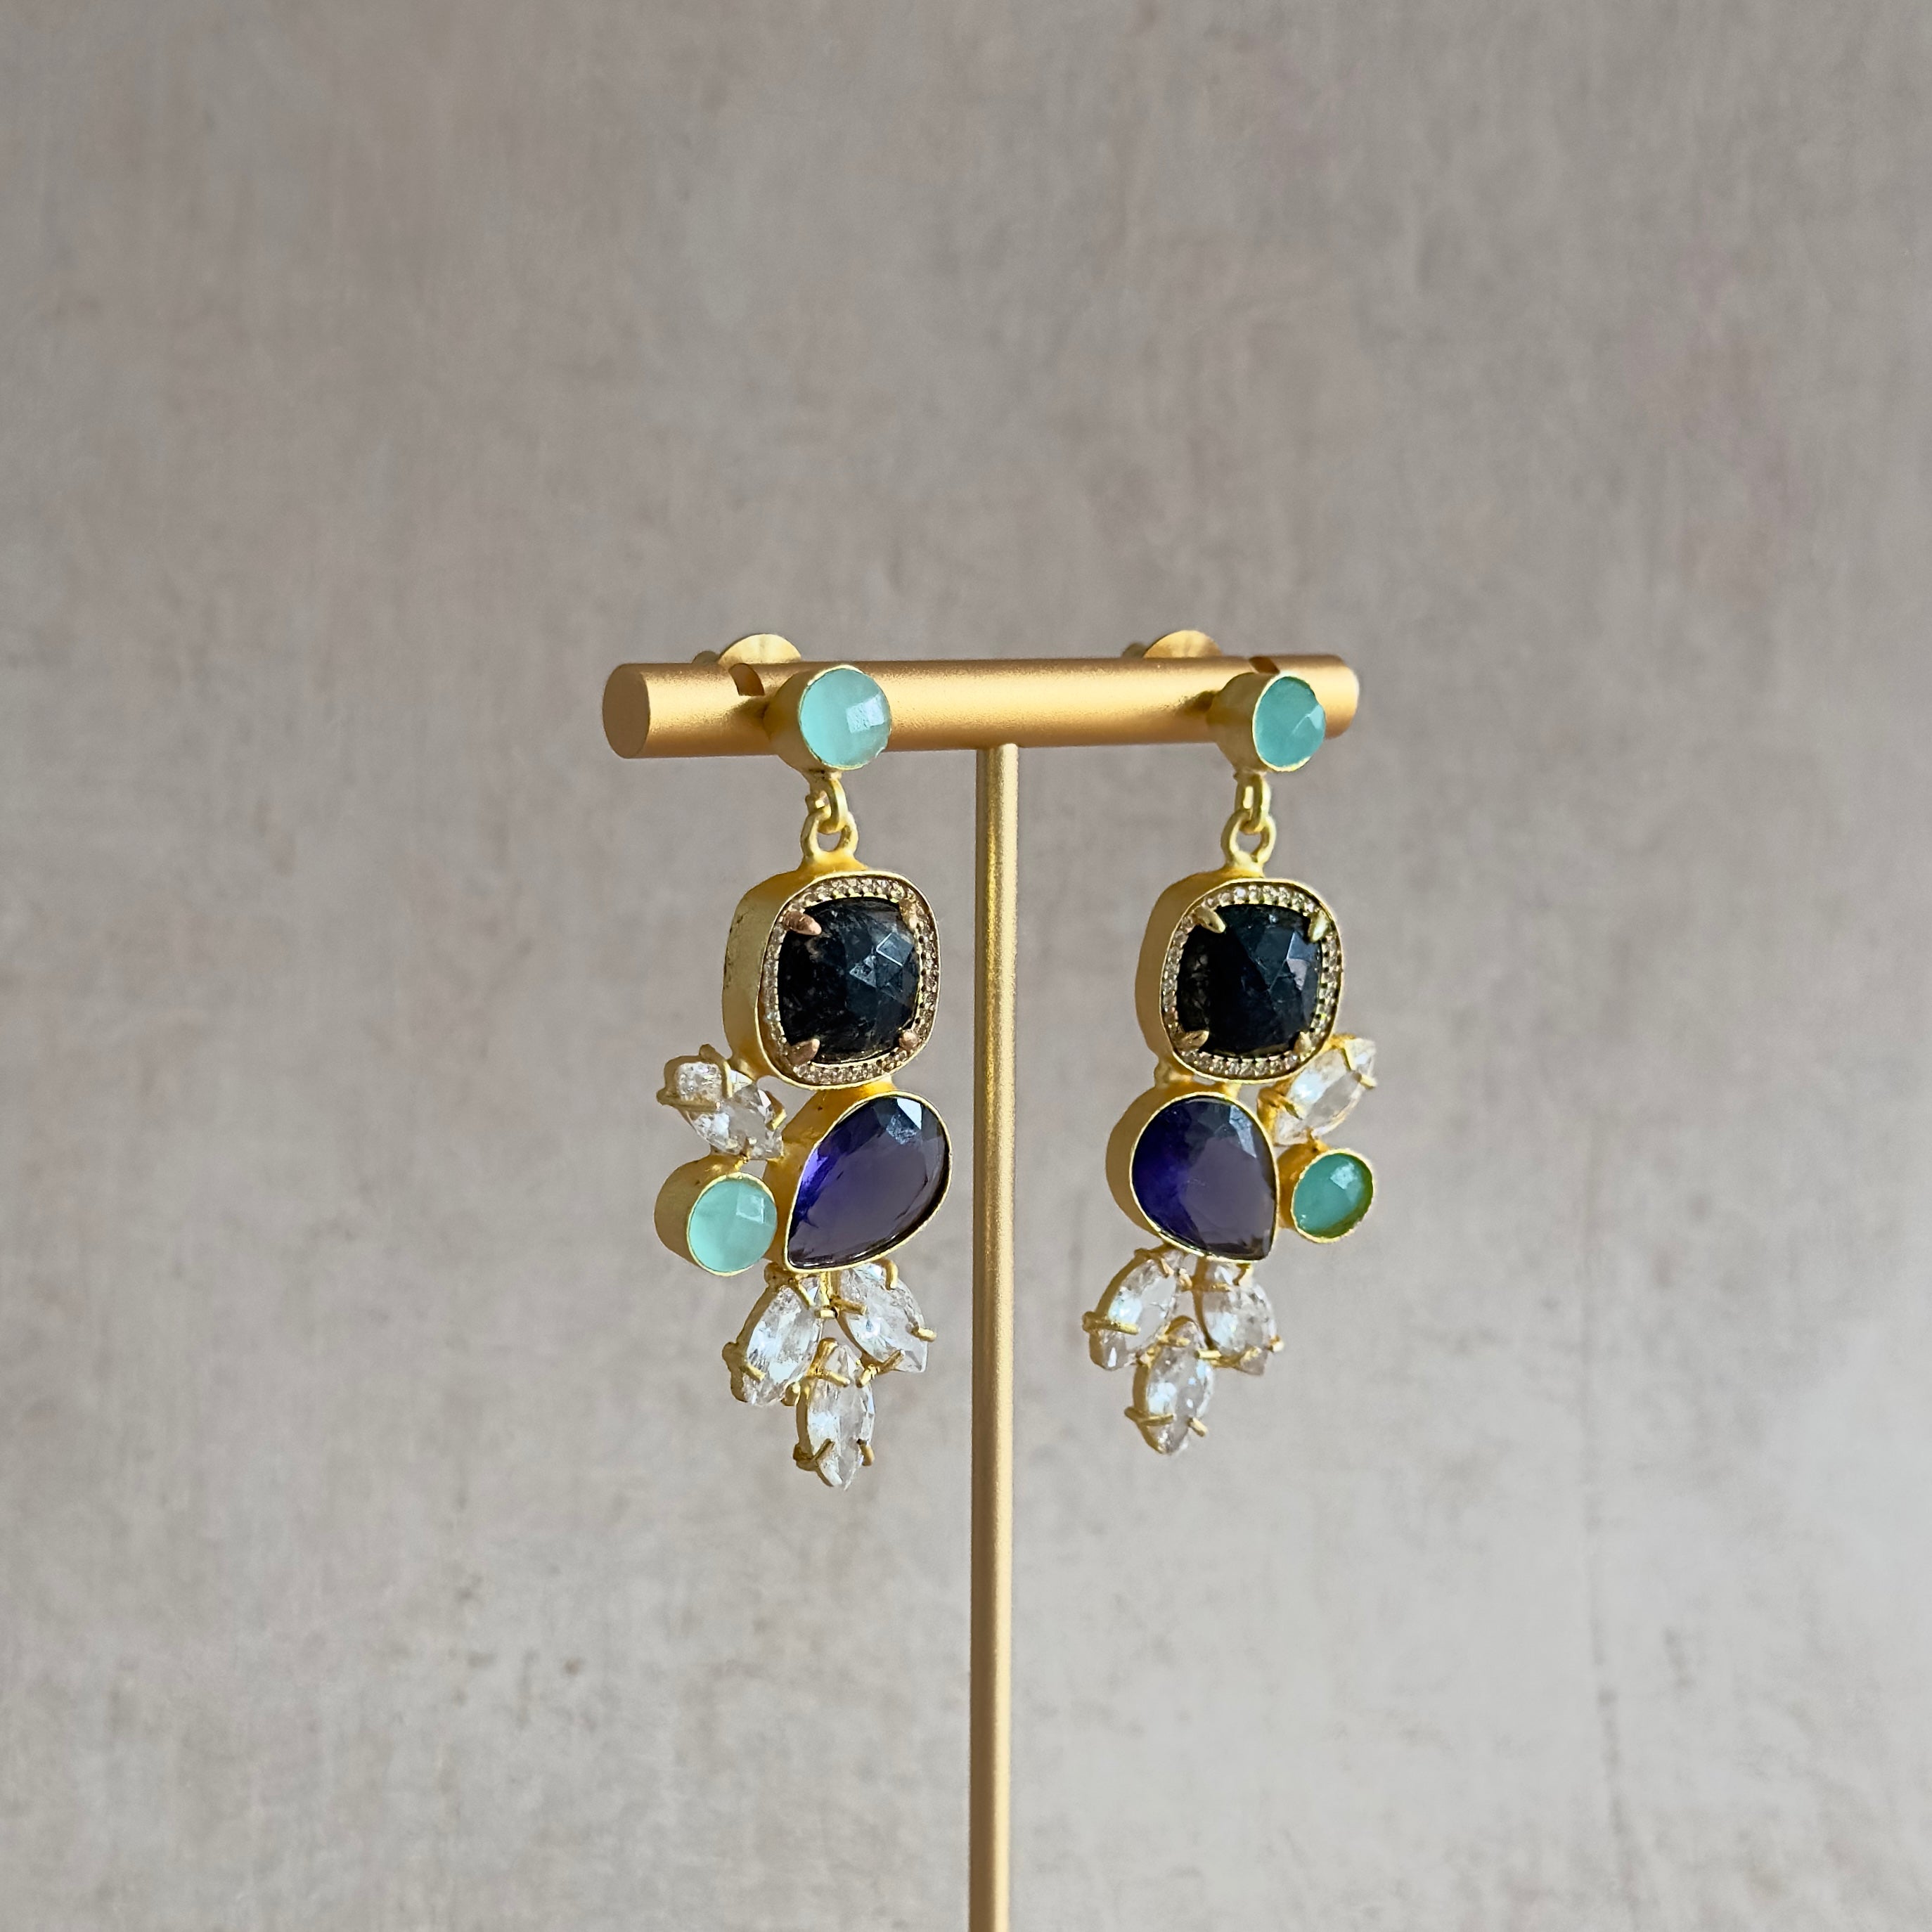 Elevate your look with Malika Mint Drop Earrings! Featuring stunning hues of mink and purple, these earrings are designed to add a touch of elegance to any outfit. The sparkling CZ crystals add a touch of glamour. Perfect for any occasion.